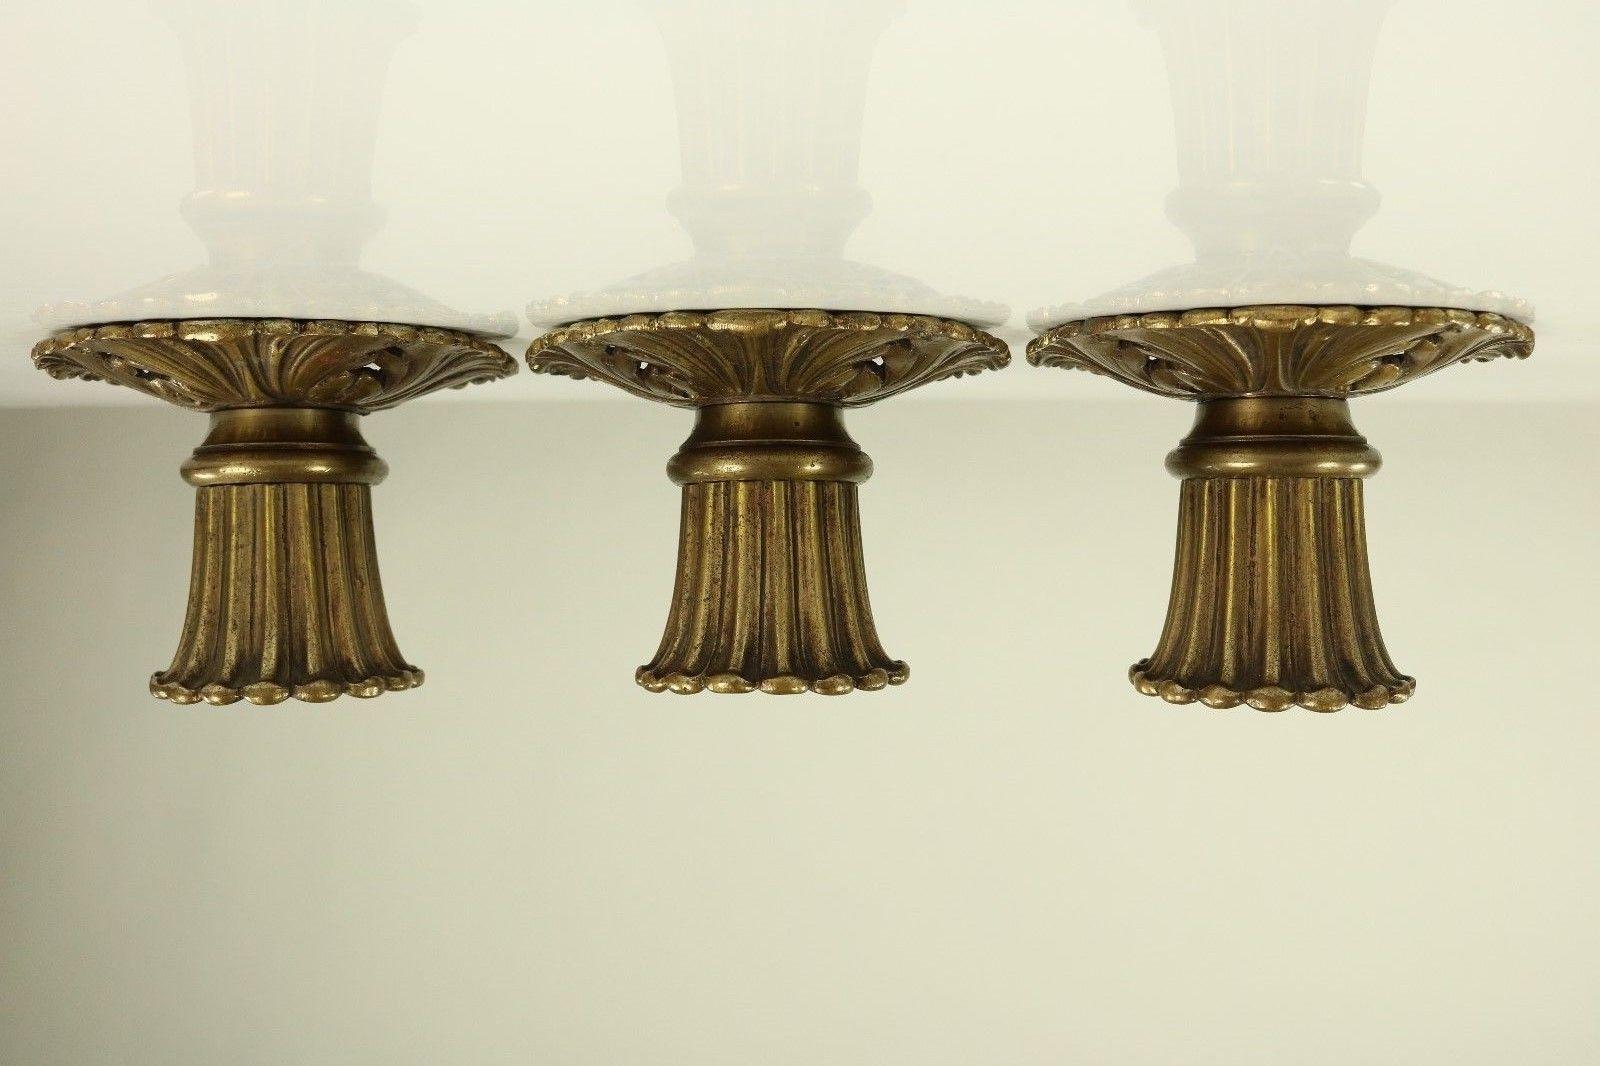 A typical Art Nouveau set of three-wall or ceiling fixture lights
made of solid brass casting in France about 1910-1920
the wiring is save and new
you need medium Edison screw bulbs (E27) to operate
(not included in this offer)
in very fine